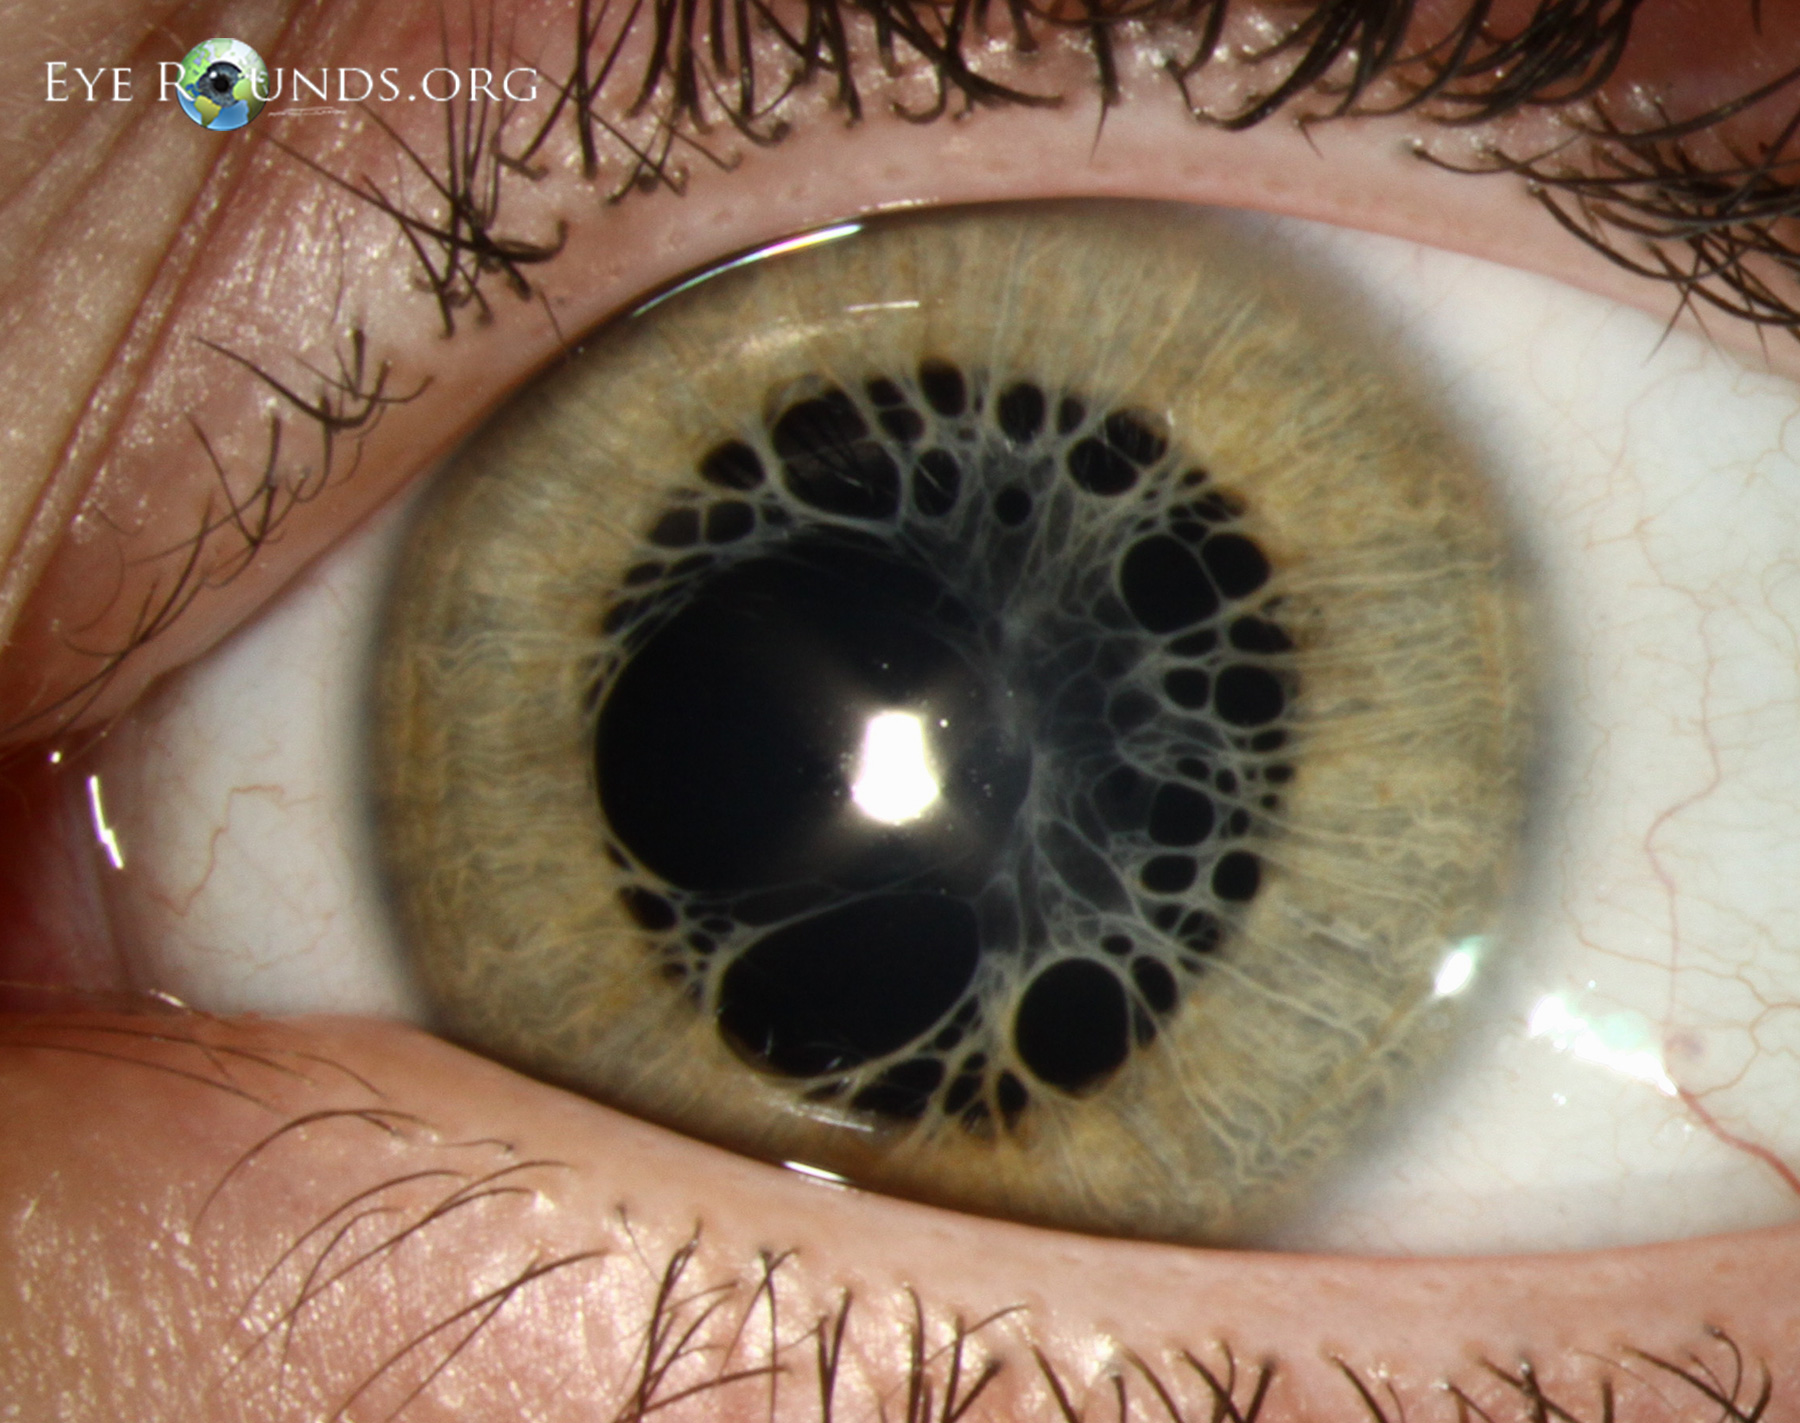 Persistent pupillary membranes other eye